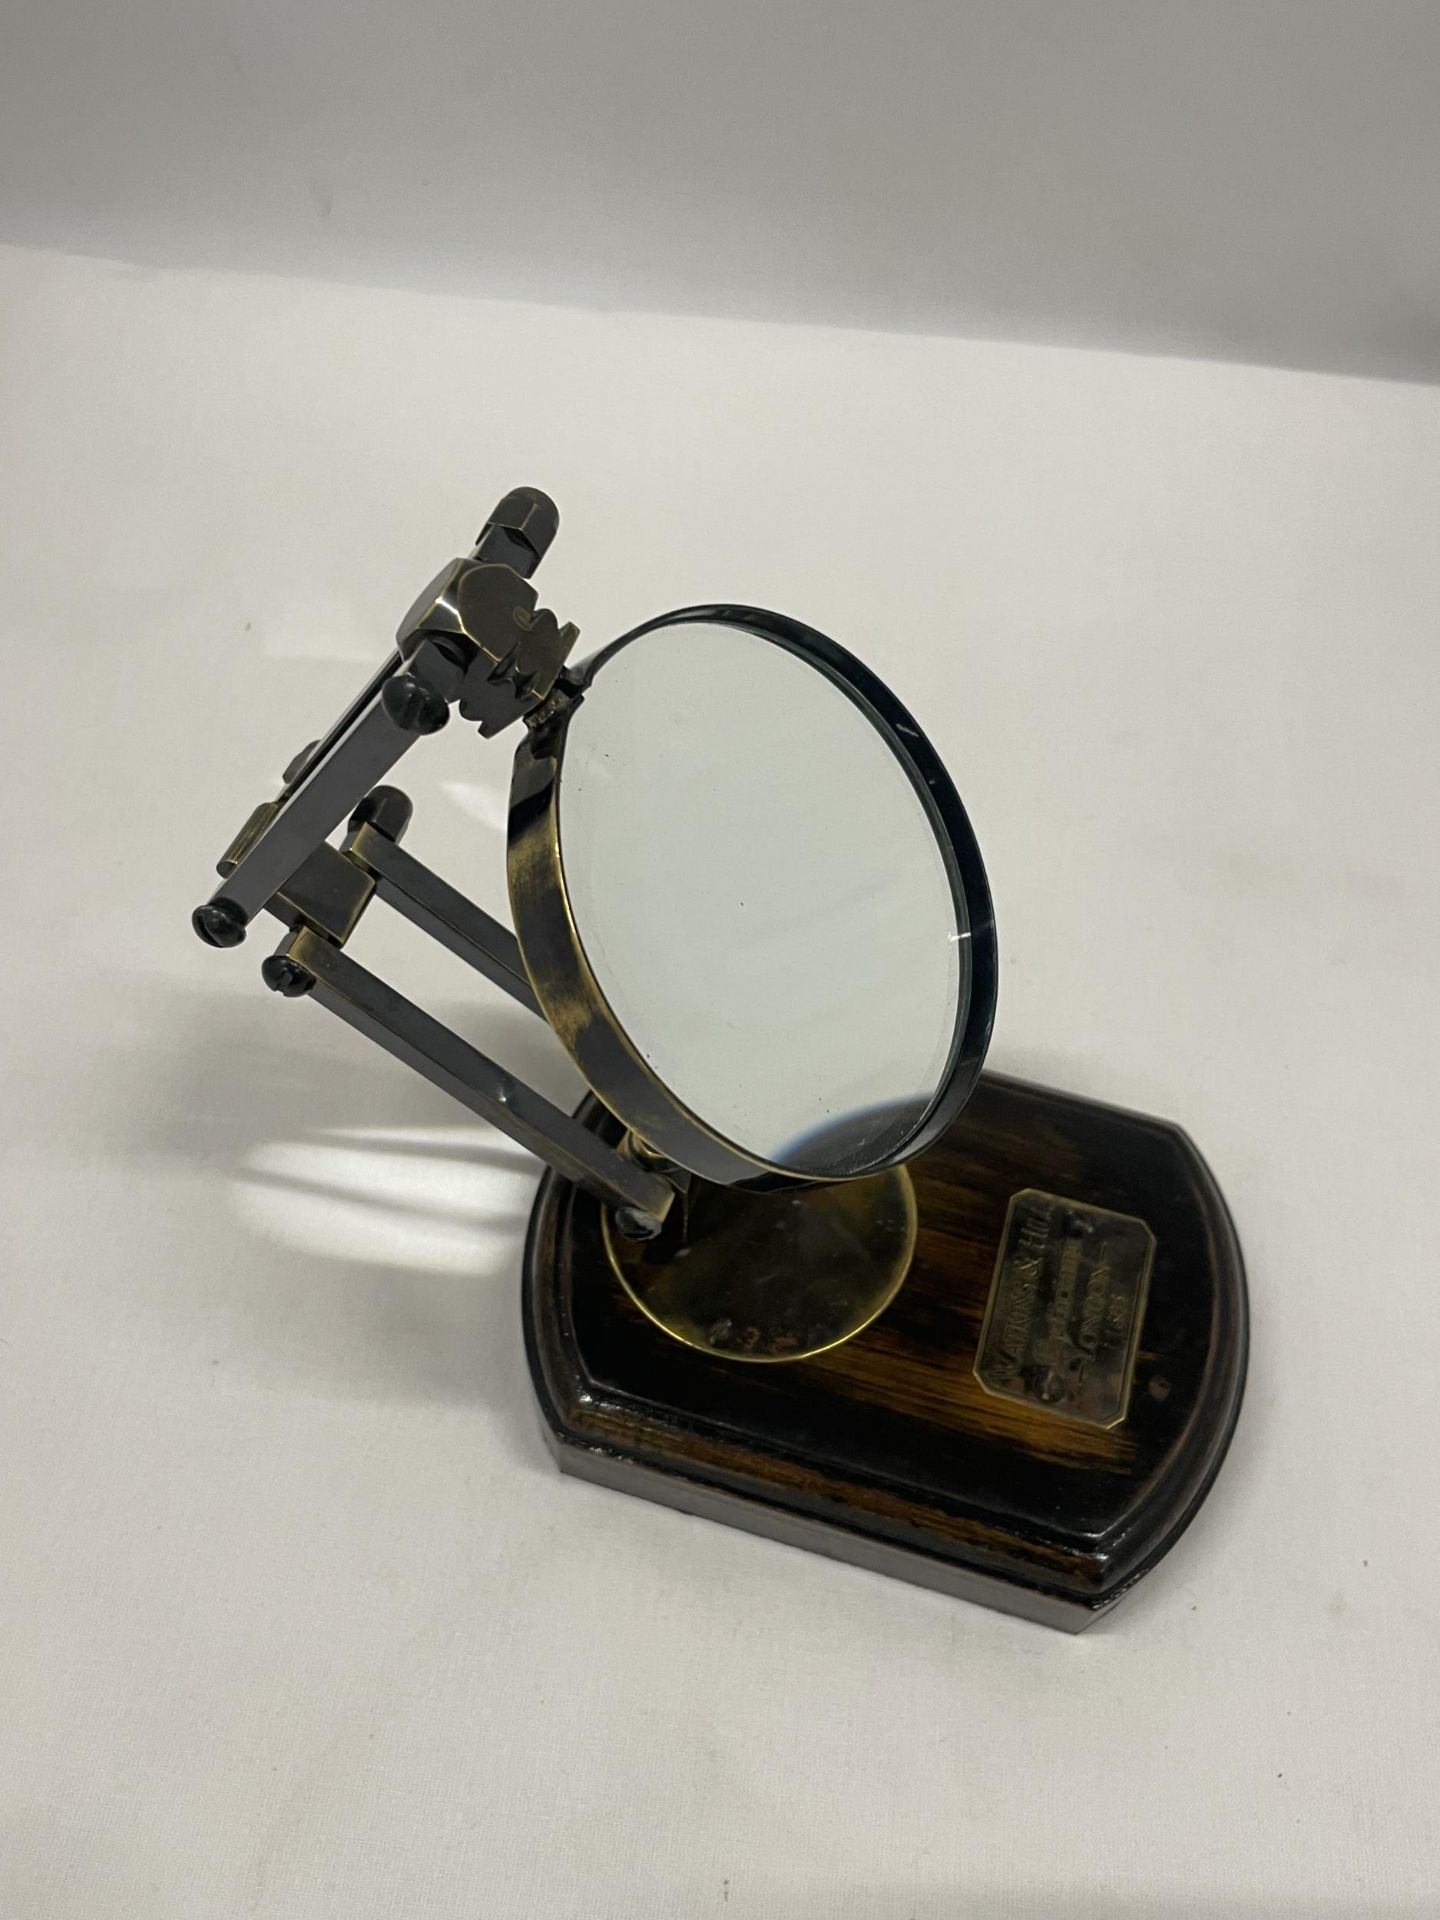 A WATKINS AND HILL MAGNIFYING GLASS ON WOODEN BASE - Image 2 of 3